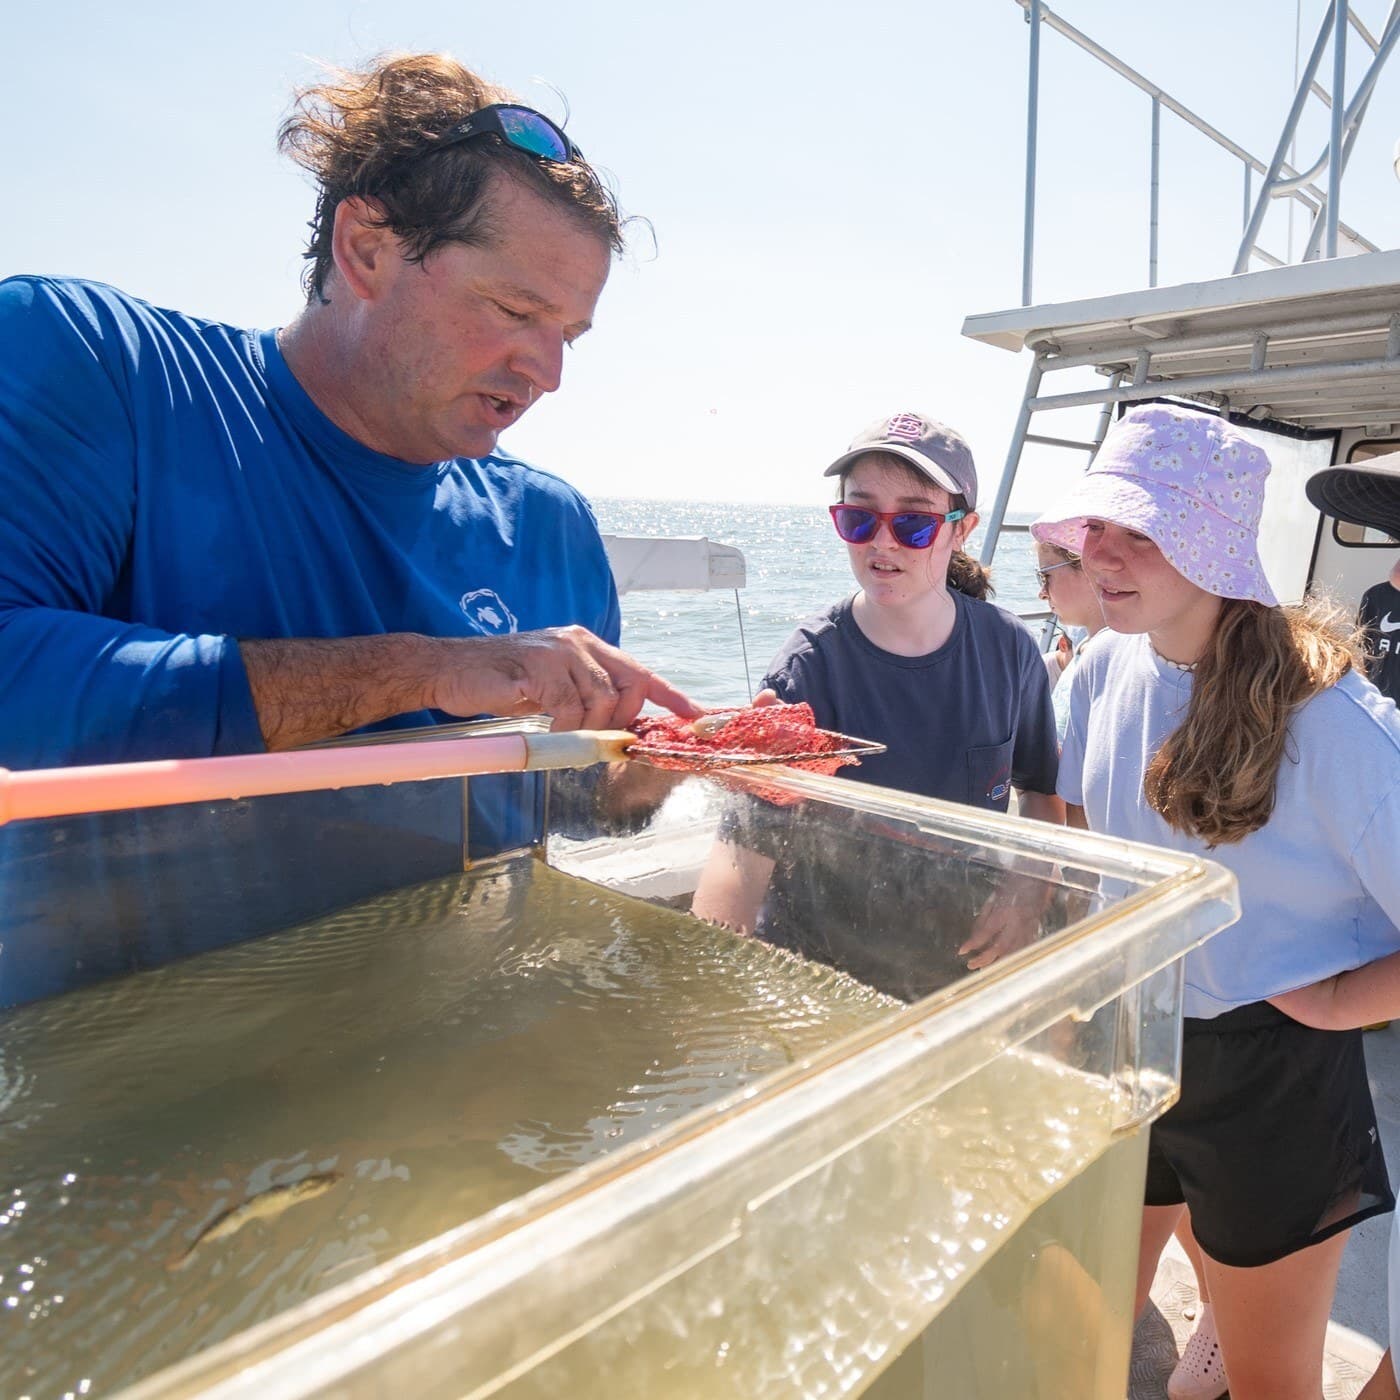 Aquarium educator on boat shows fish to summer campers